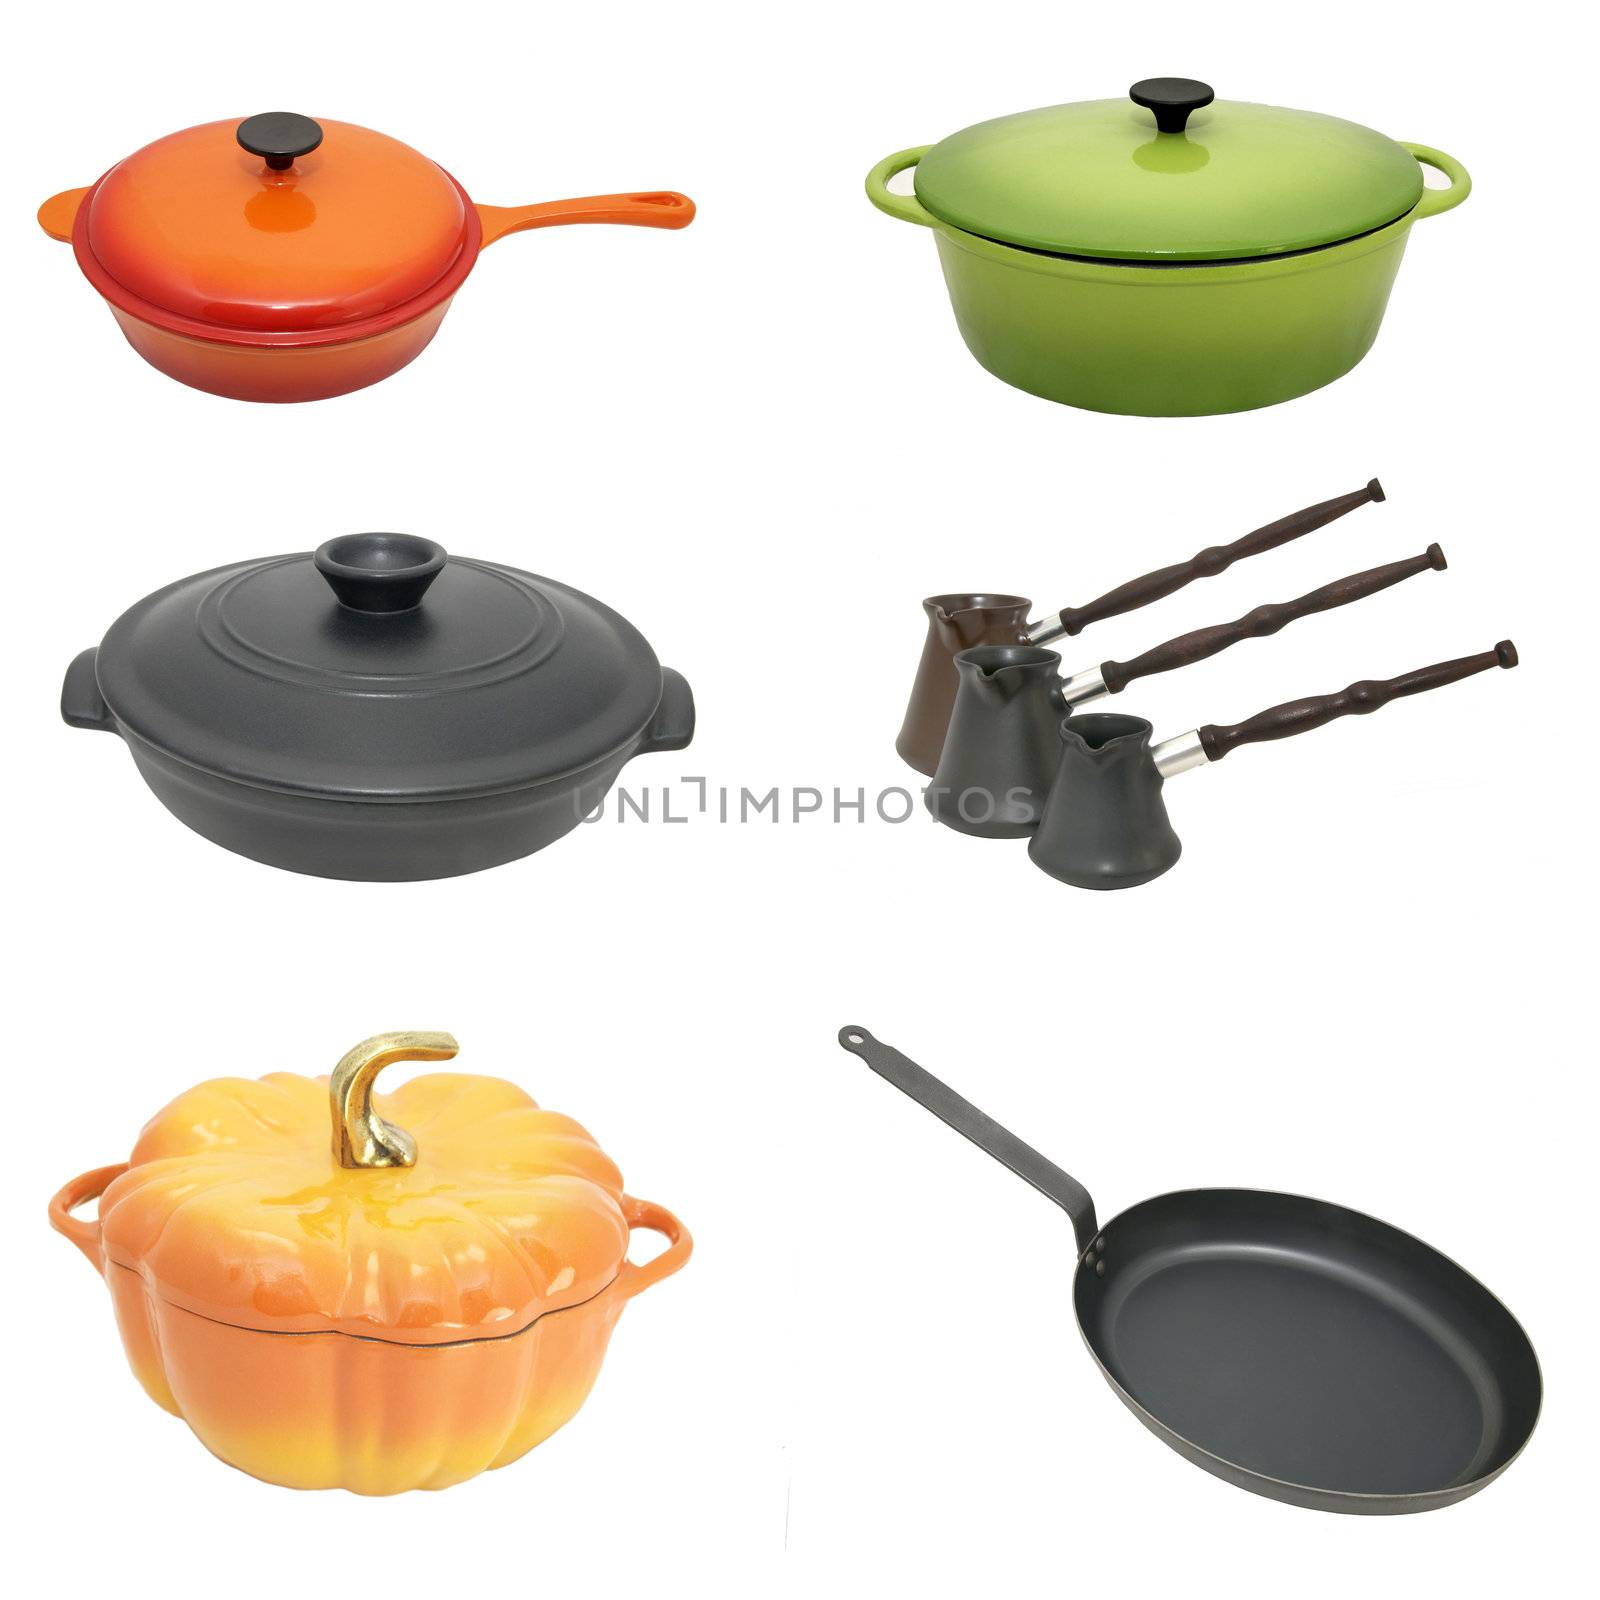 kitchen utensils for cooking pots and pans unit